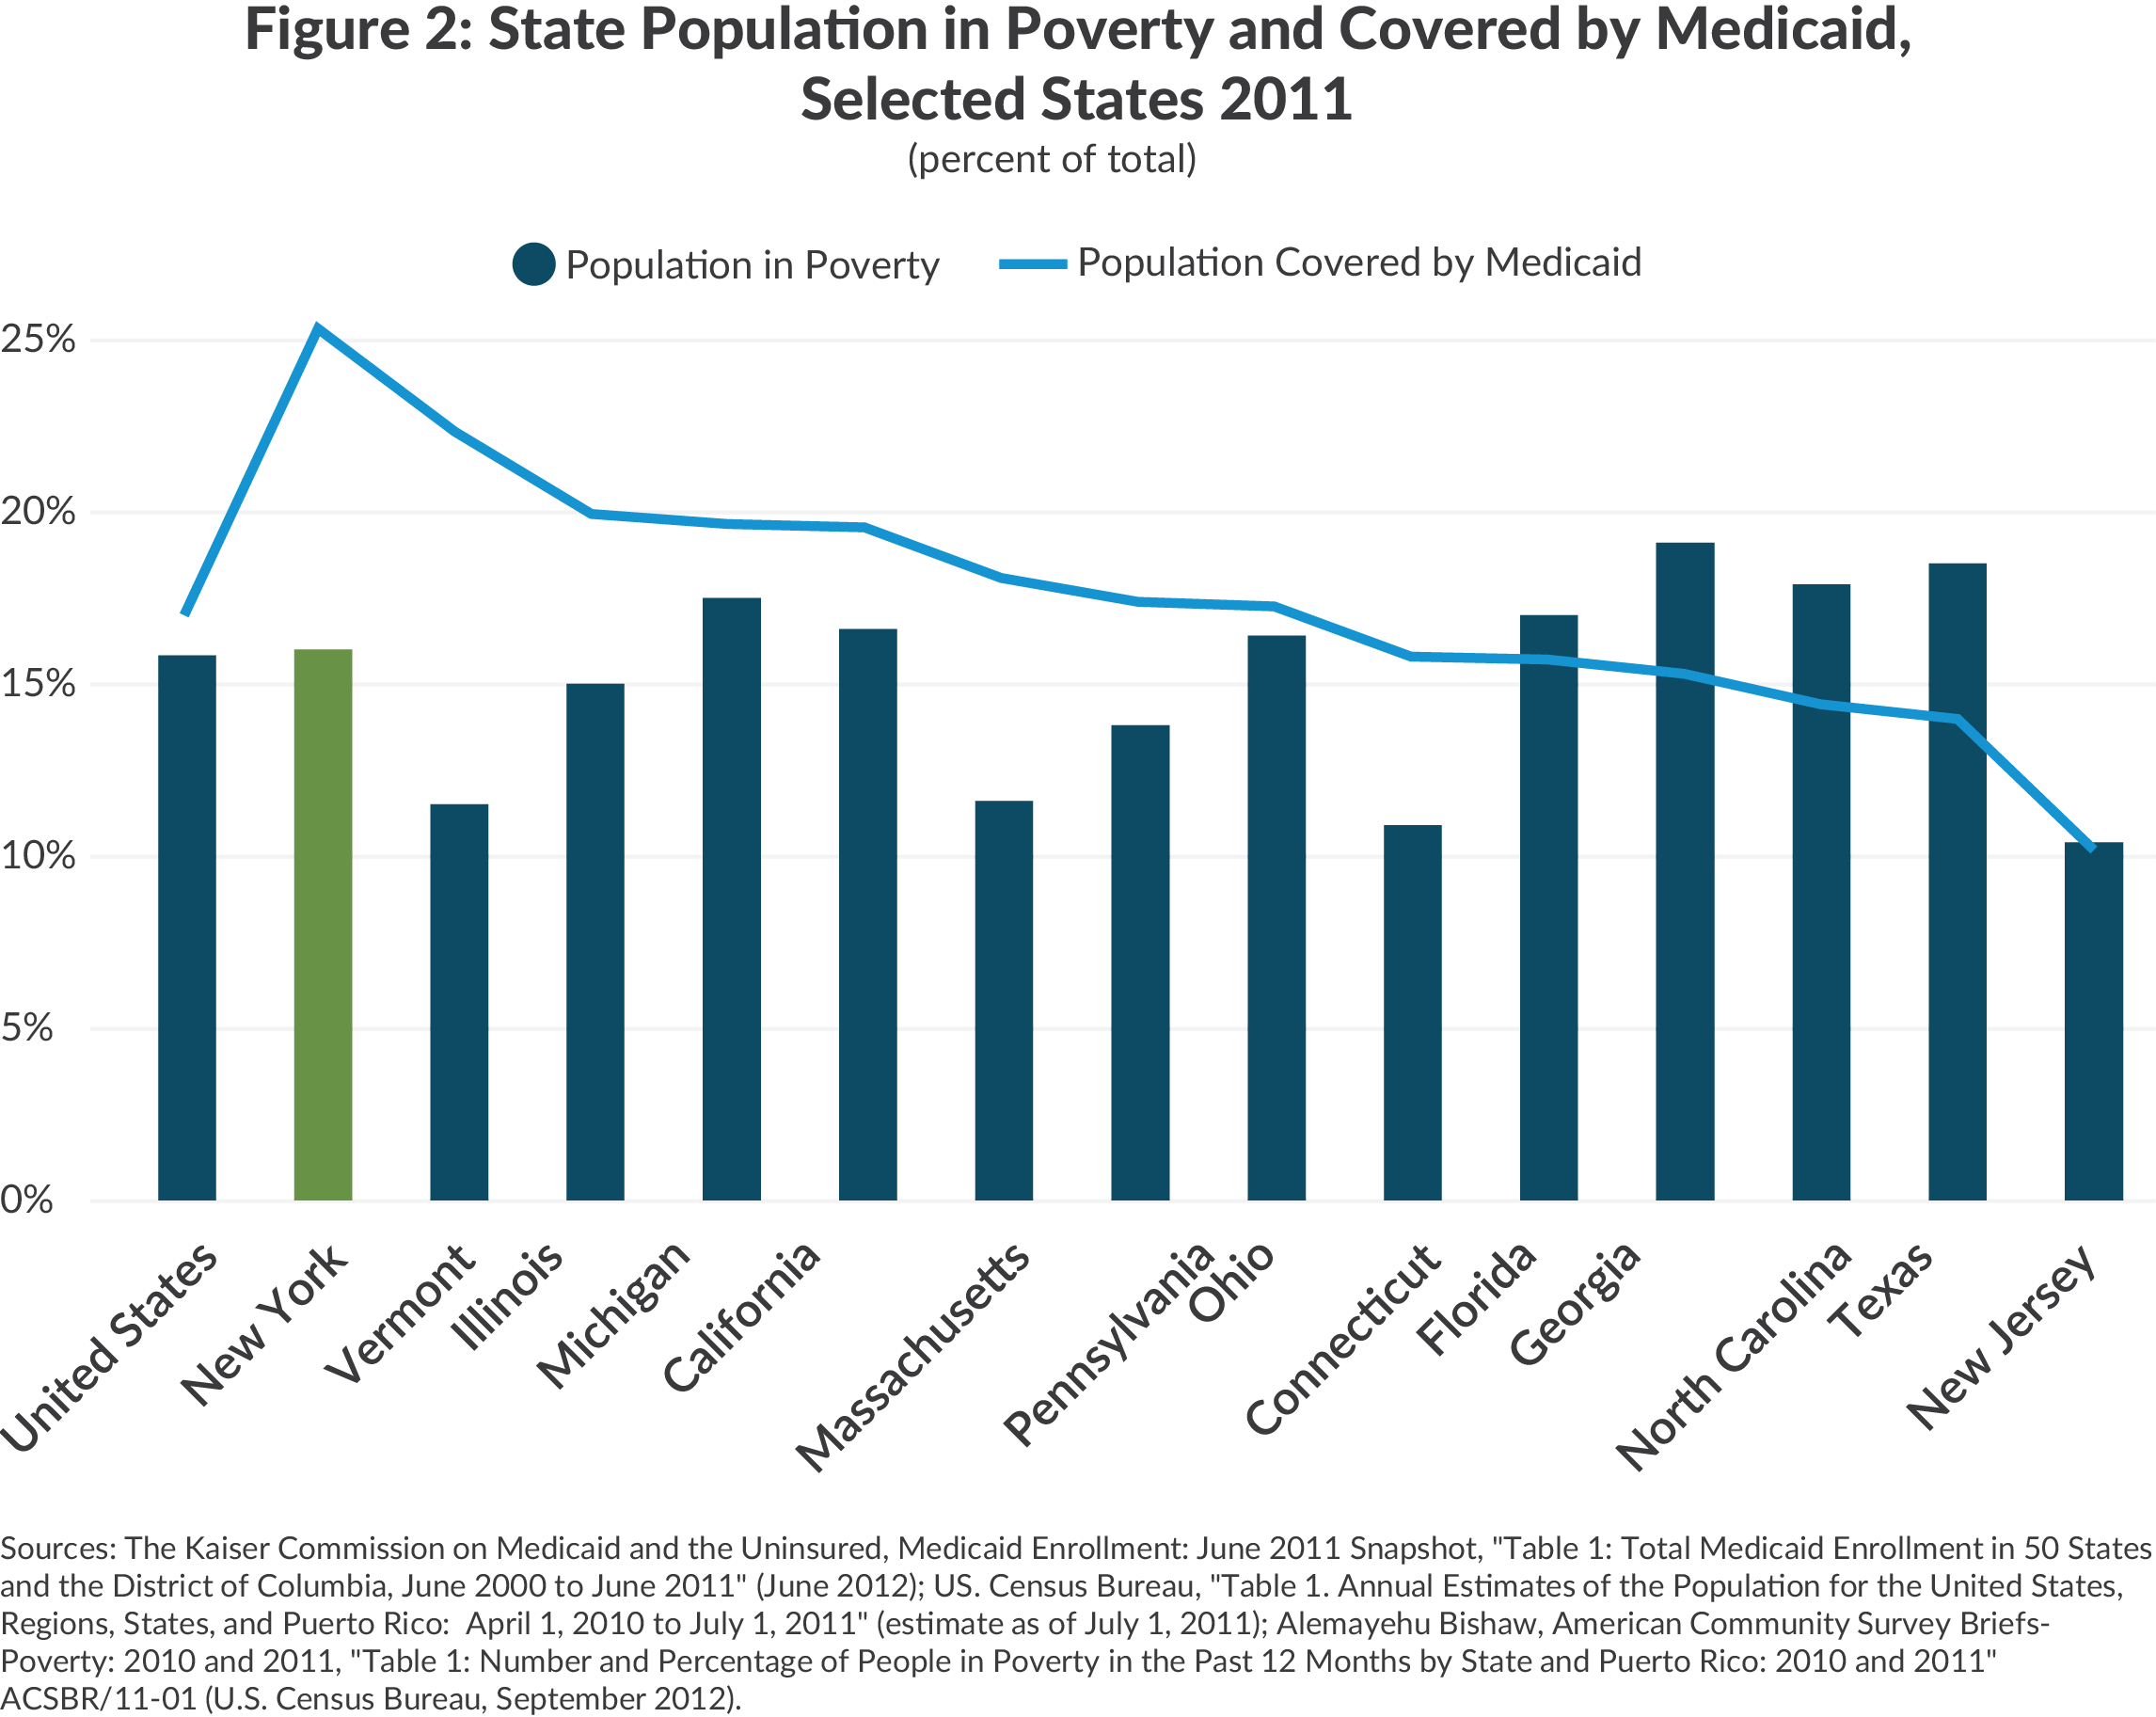 Percent of population in poverty and covered by Medicaid, NY, US and other states